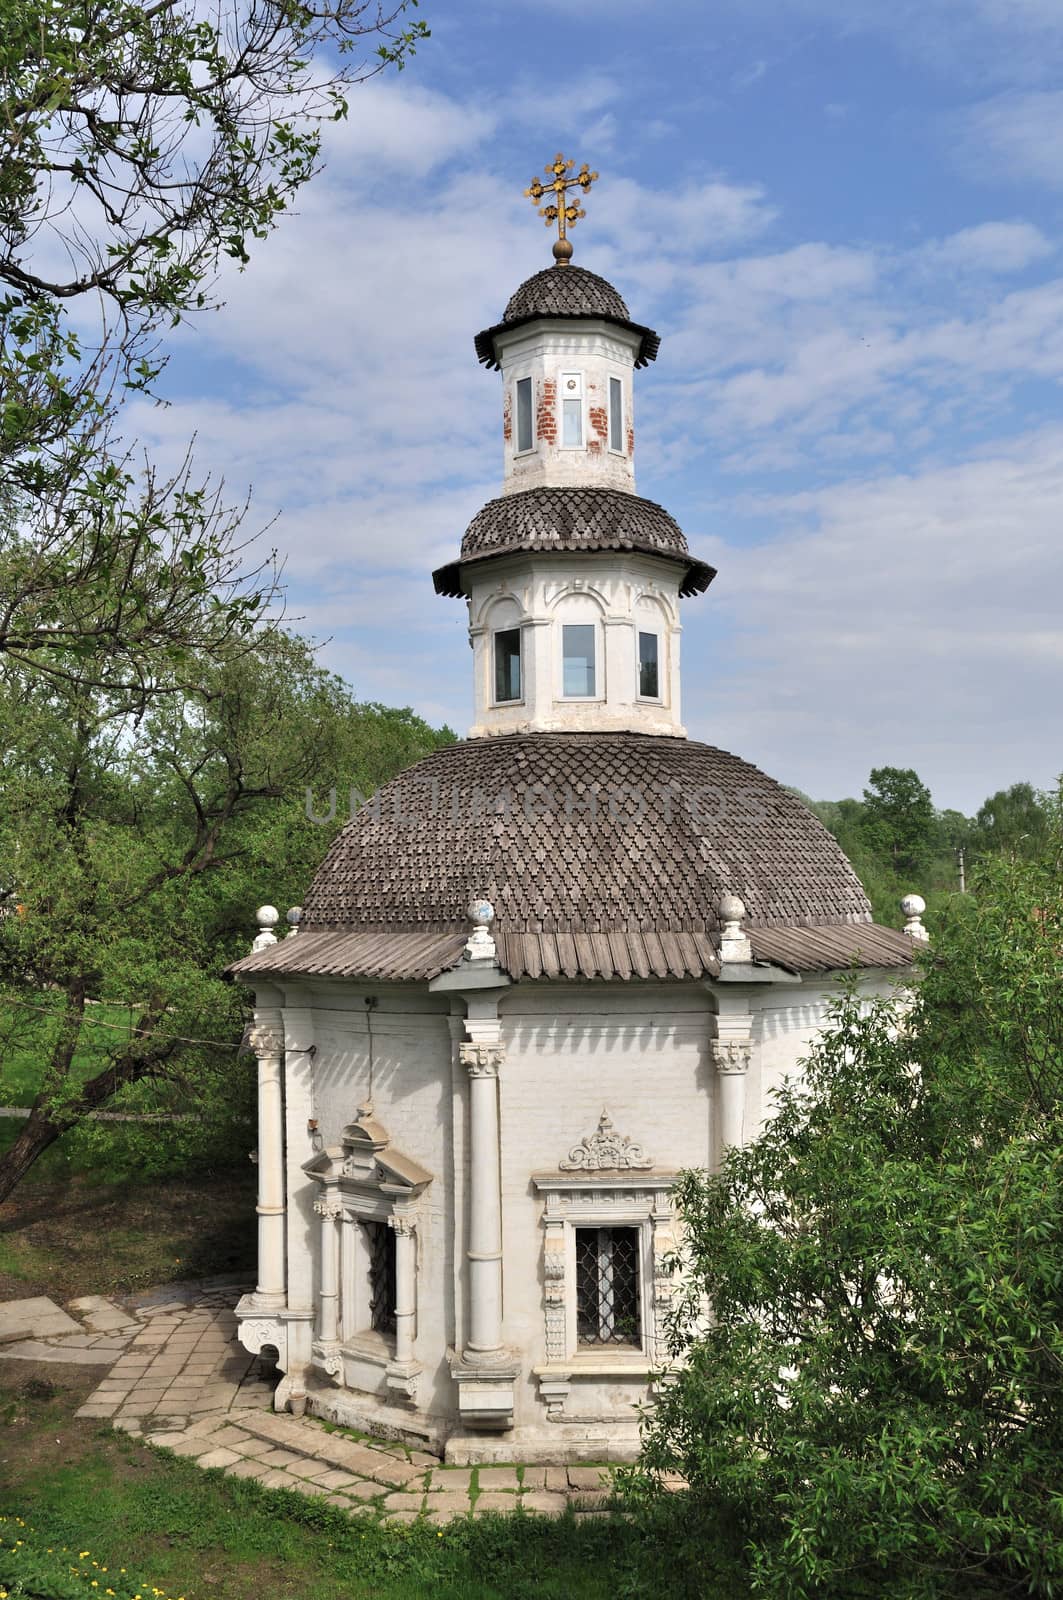 Chapel at the well in Sergiev Posad town, Russia